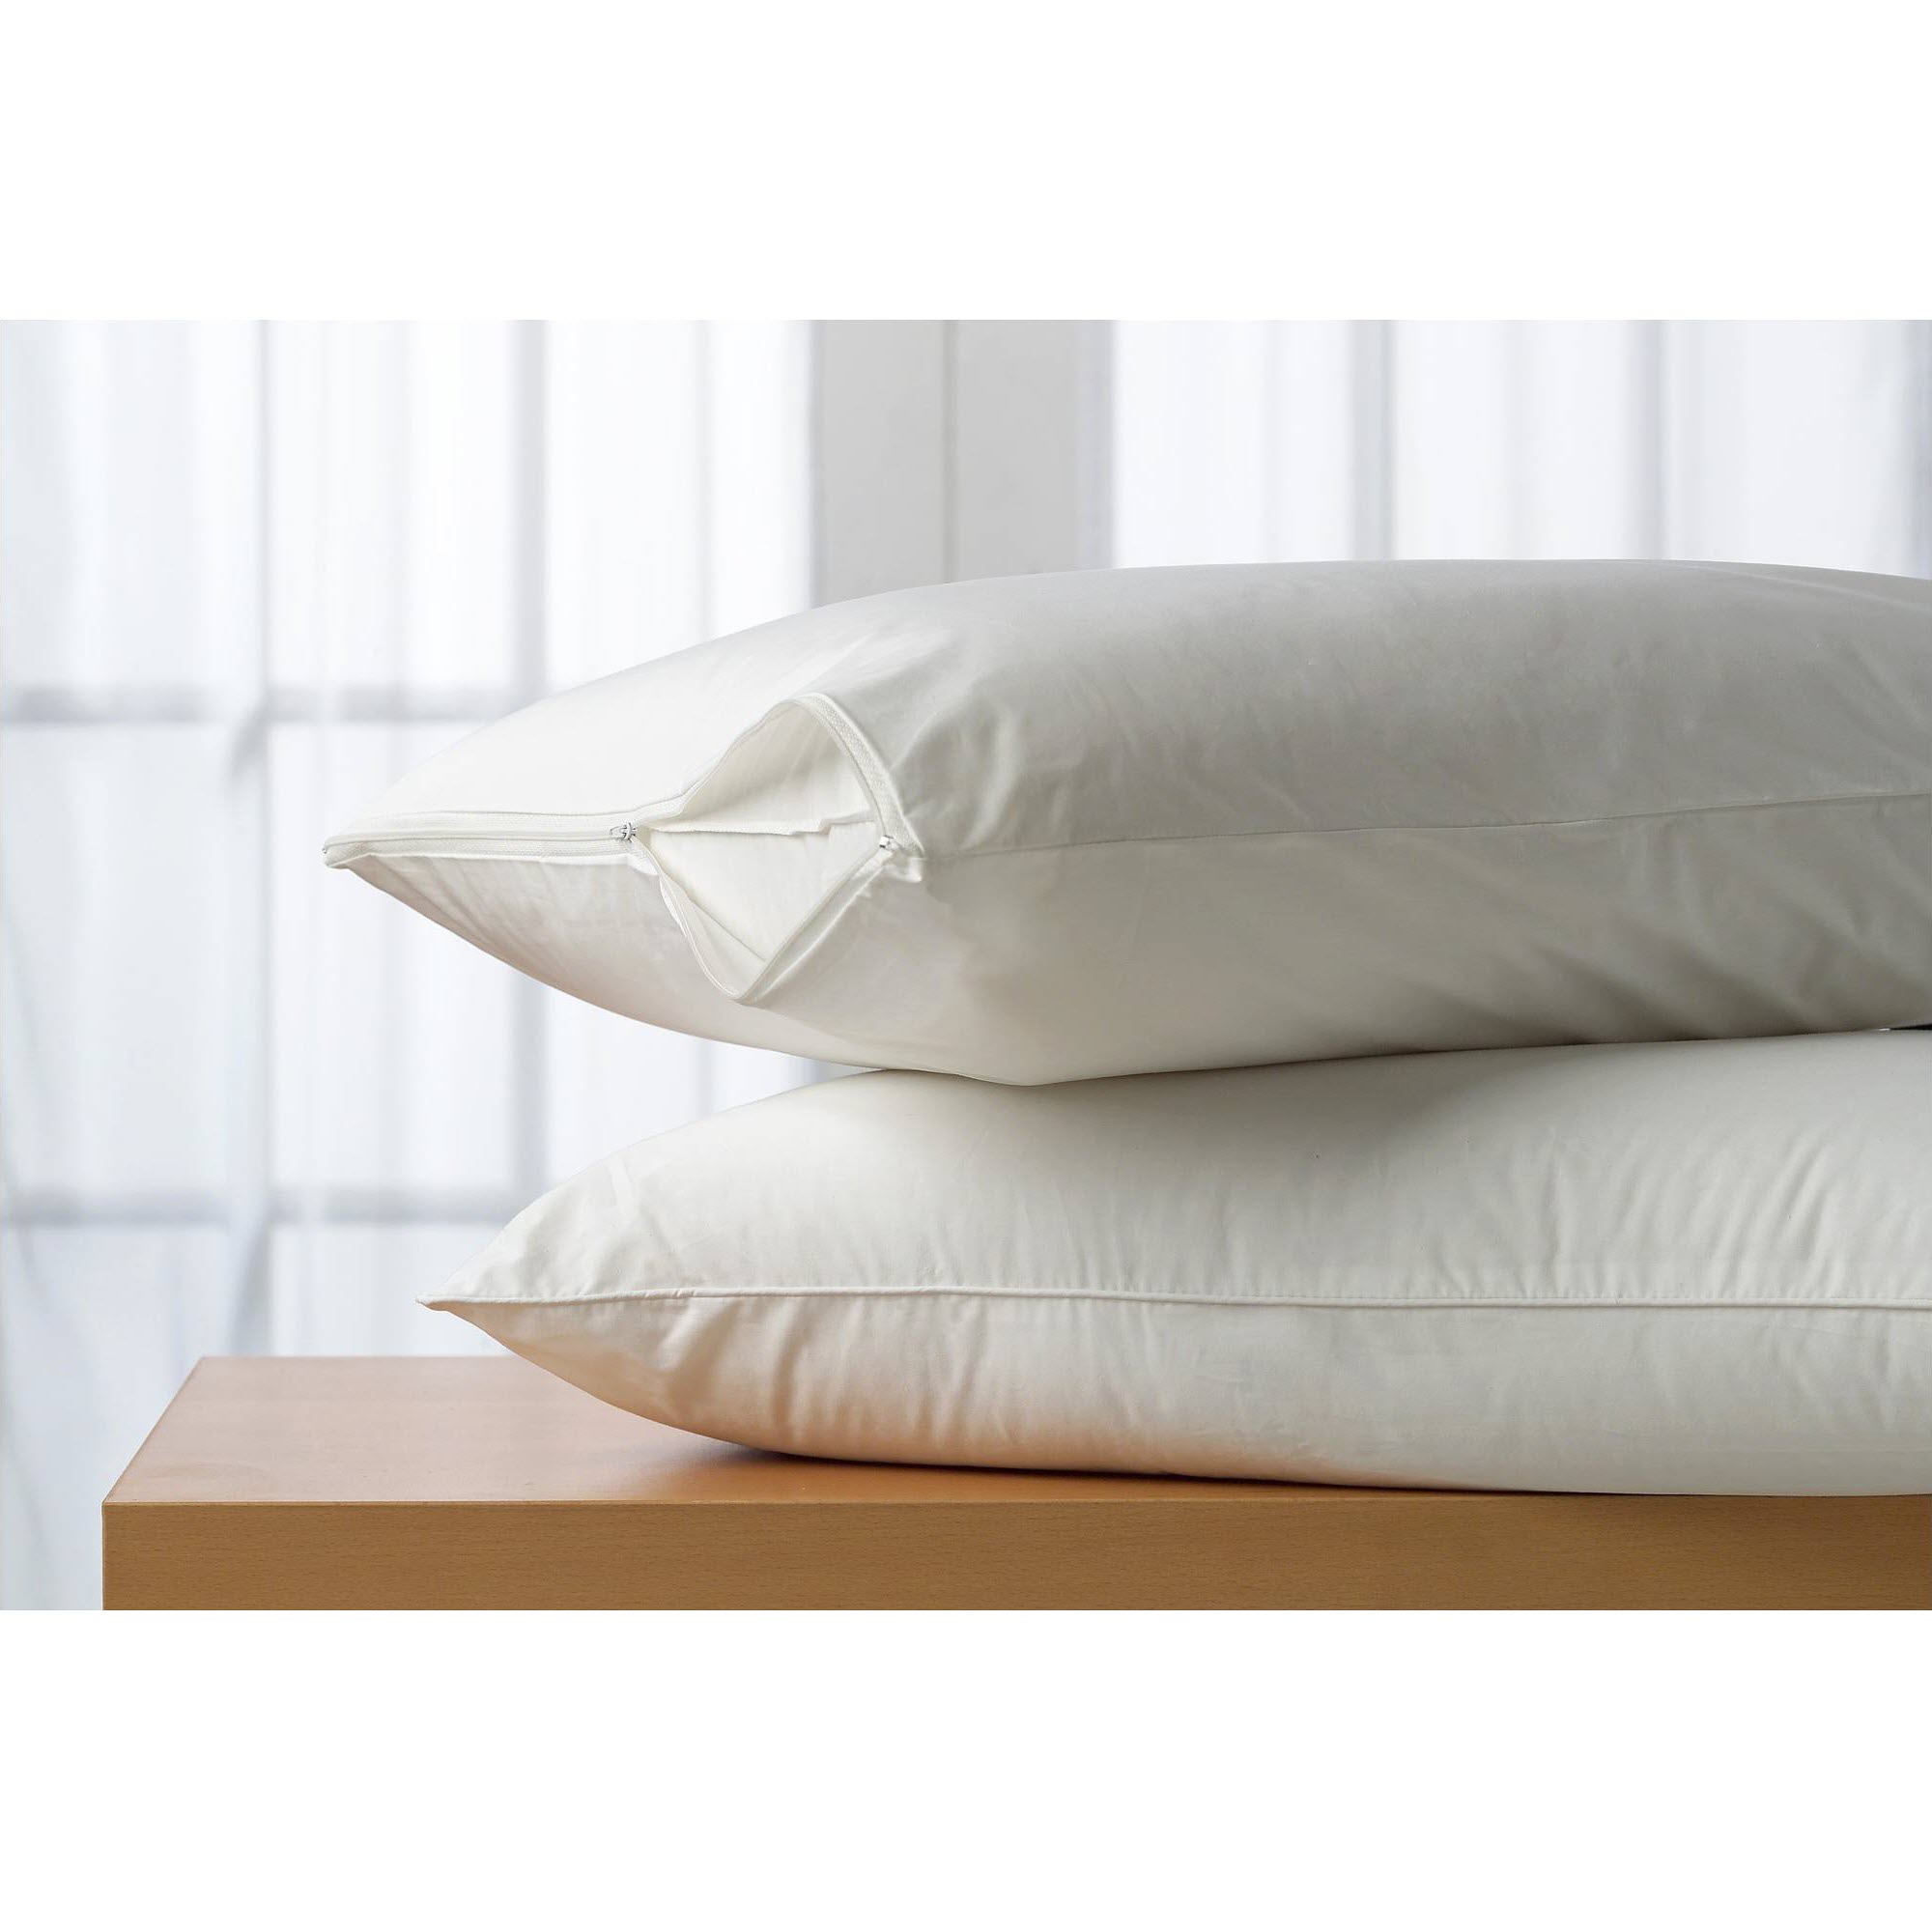 Allerease Cotton Zippered Pillow Protector, Queen, 2 Pack - image 3 of 5